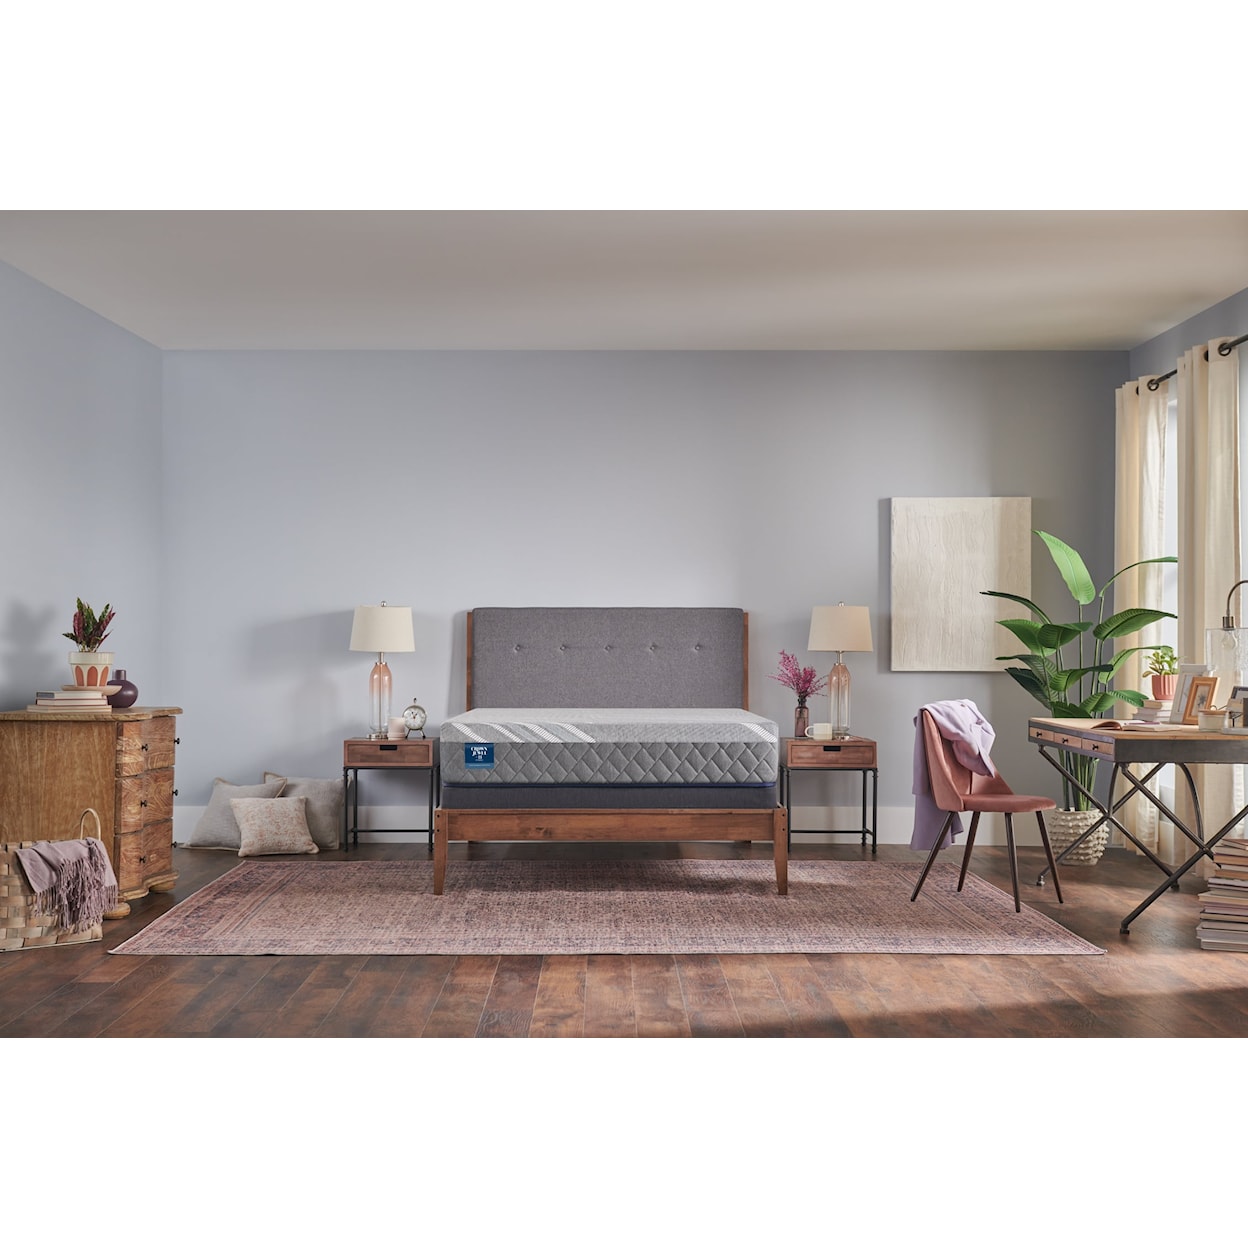 Sealy Crown Jewel H4 Fourth & Park Firm Twin Mattress